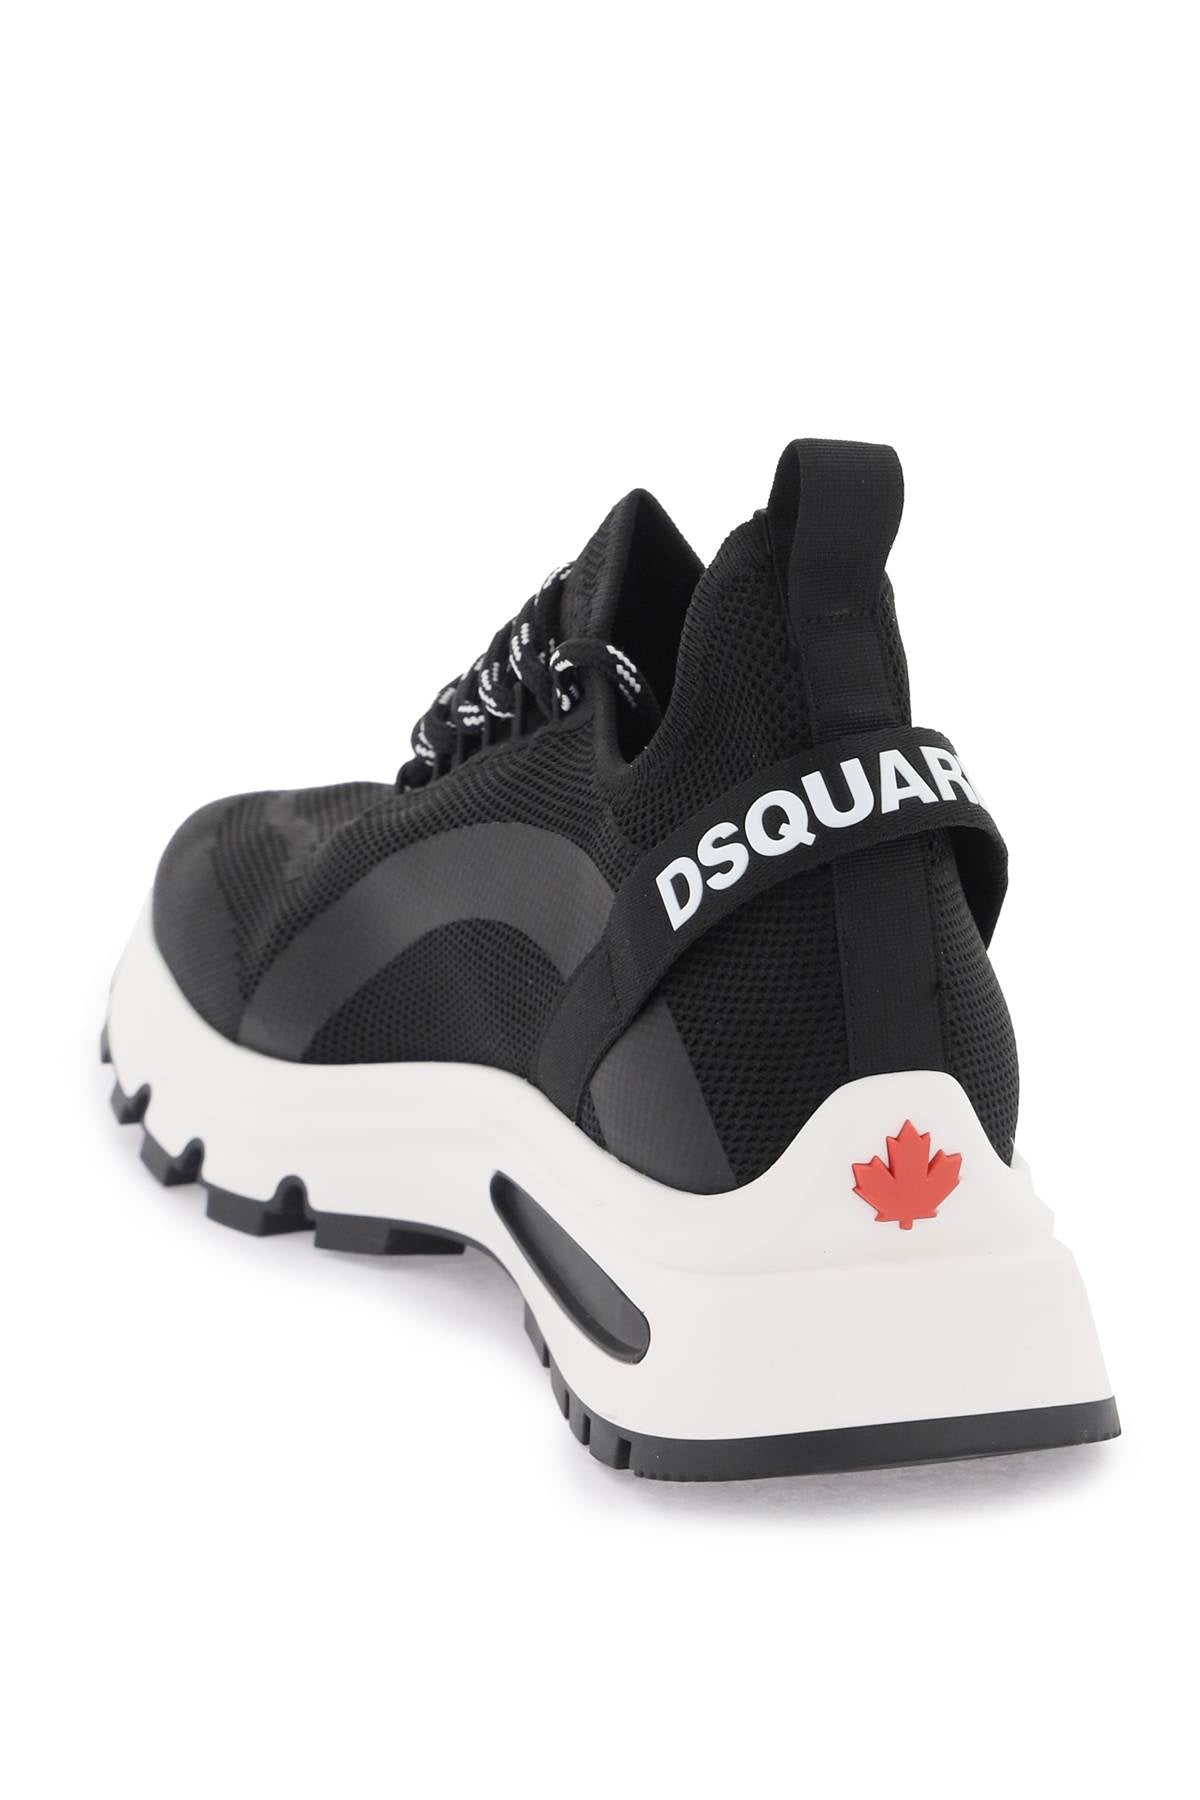 Dsquared2 run ds2 sneakers-2